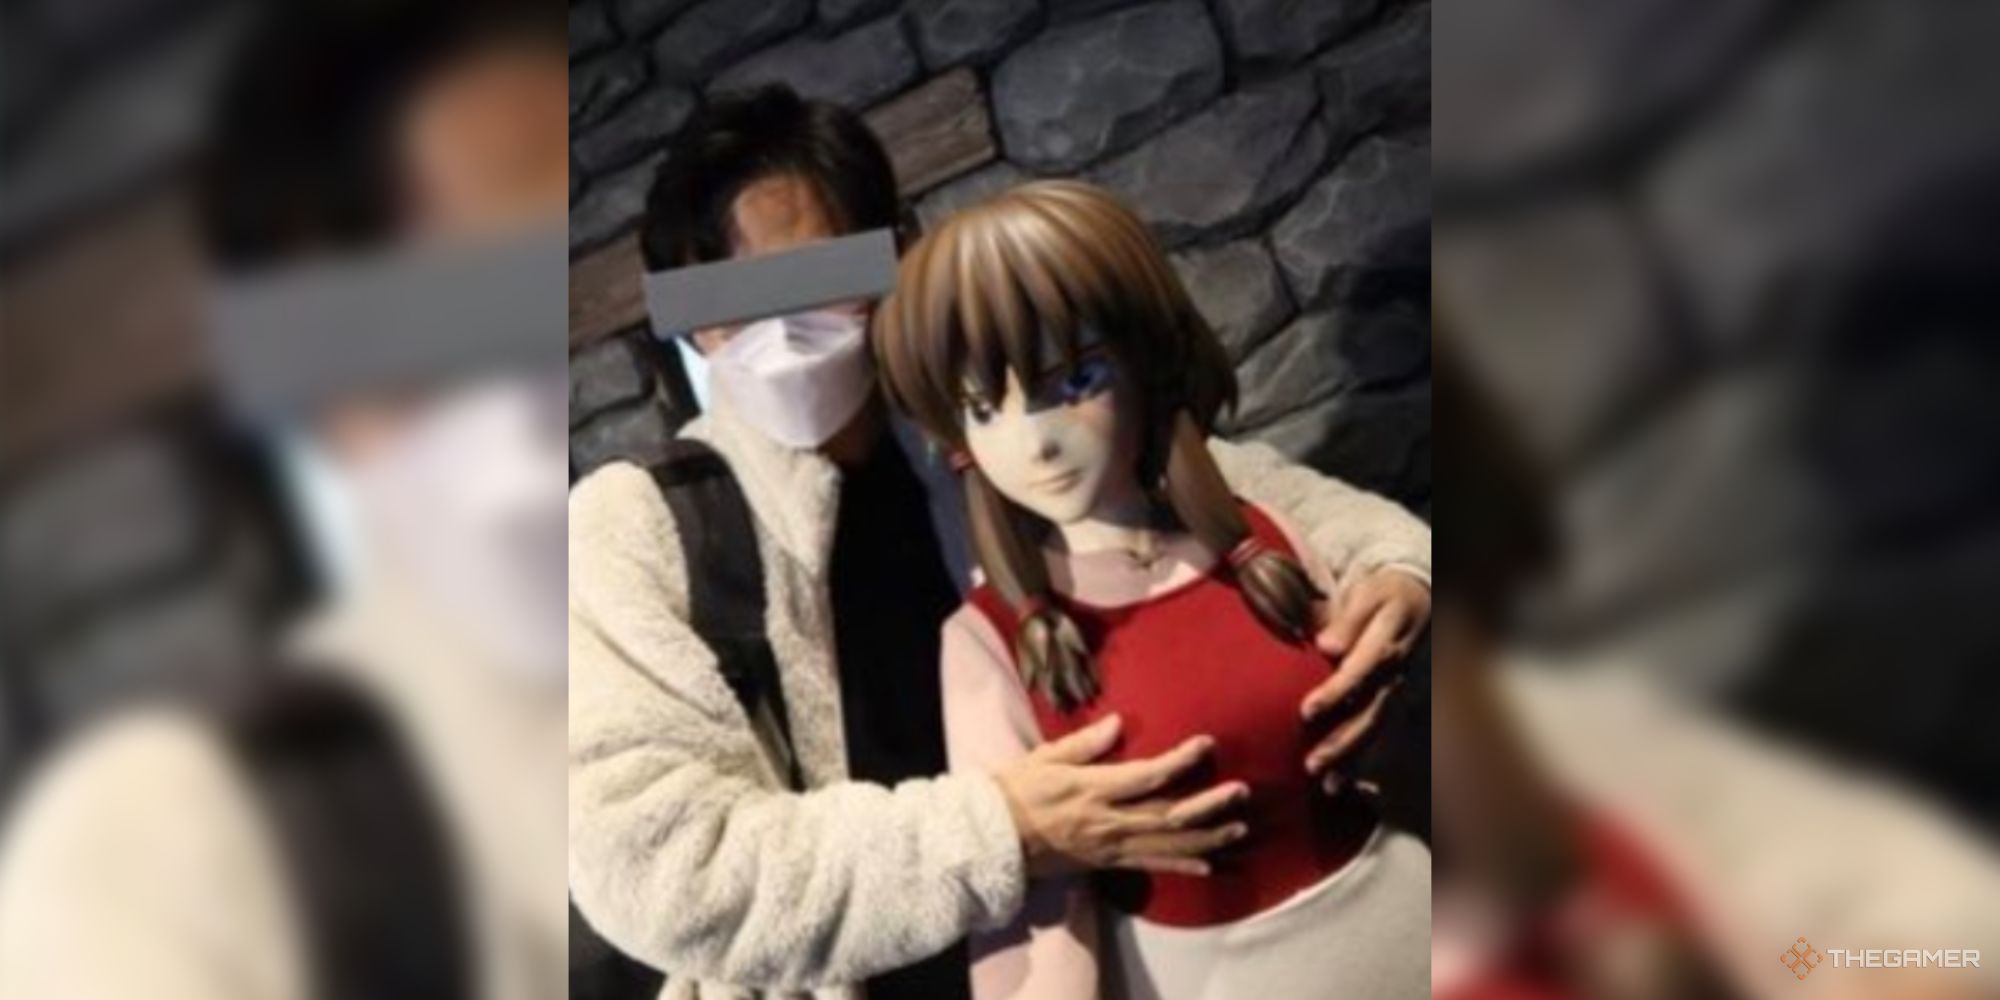 Studio Ghibli Park Guests Told To Stop Groping Underage Characters